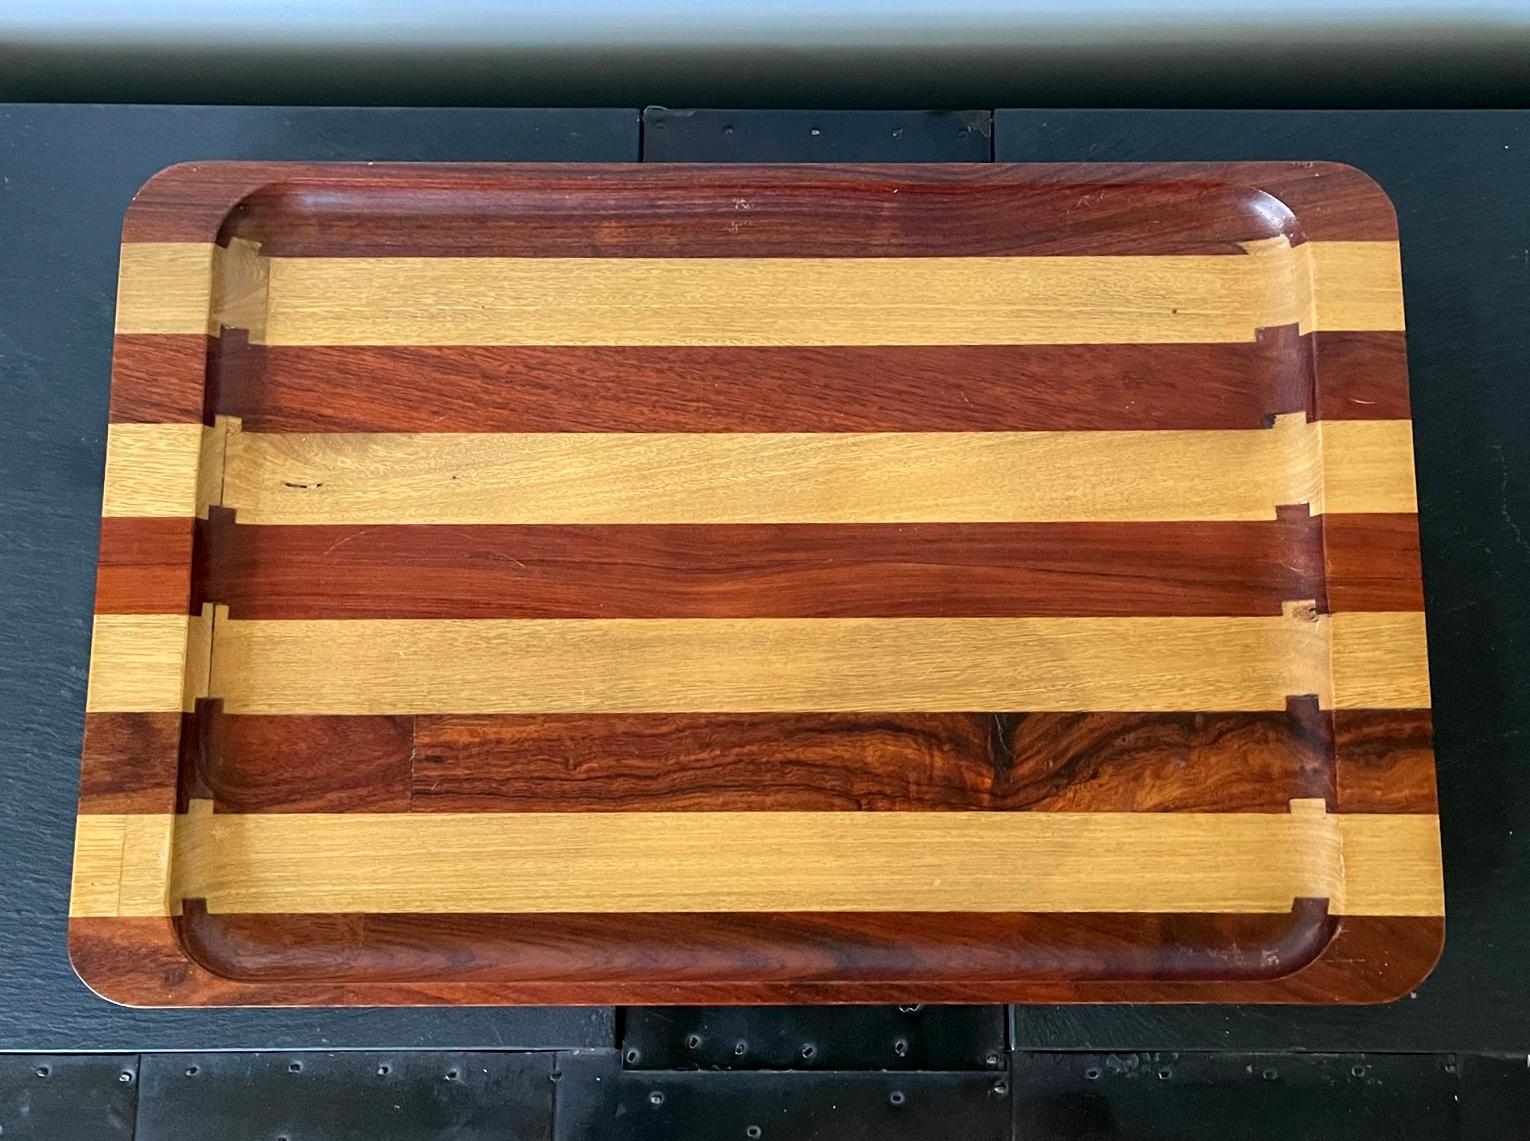 A large rectangular wood tray designed by Don Shoemaker and handcrafted by SEN~AL, S.A. Mexico circa 1950. Using exotic local wood in Mexico such as Cocobolo, Shoemaker designed and manufactured his signature collection of furniture as well as